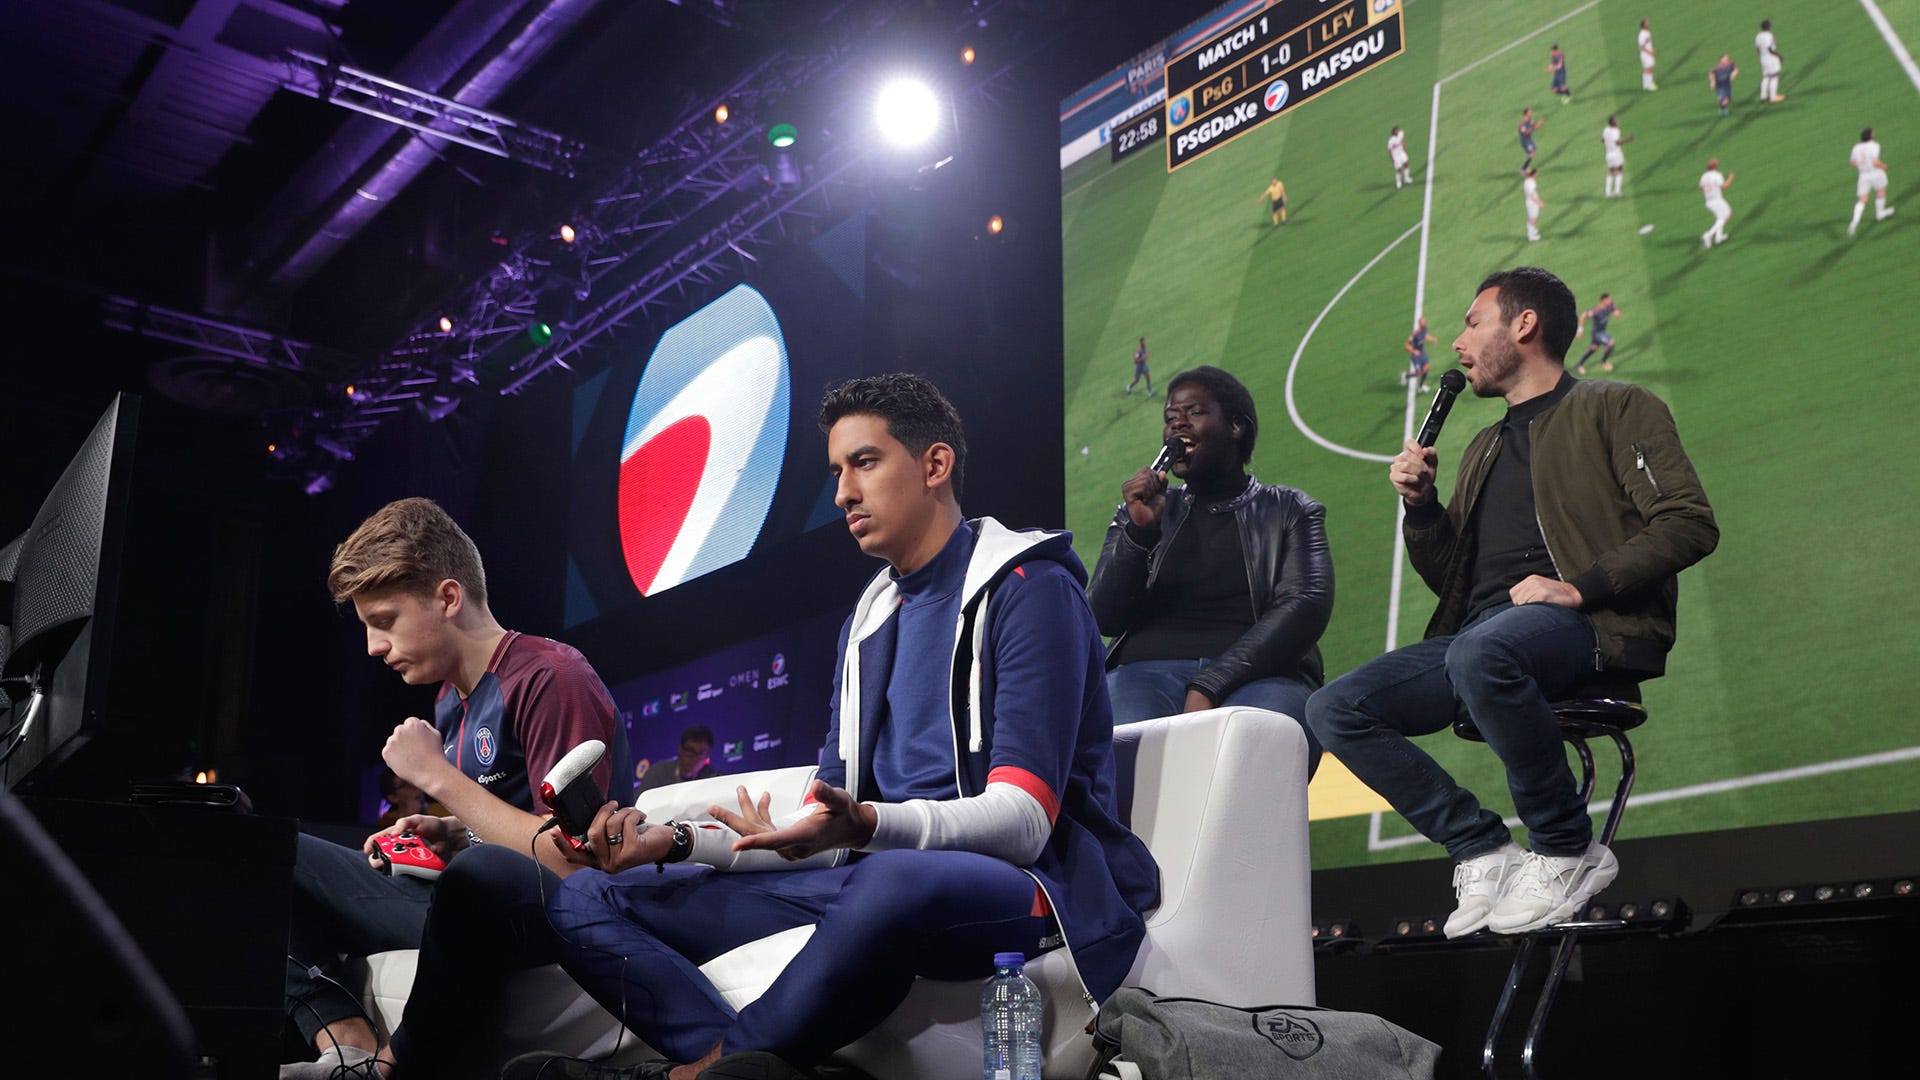 FIFA eSports news London to host 2018 FIFA eWorld Cup final in battle for $250,000 prize money Goal